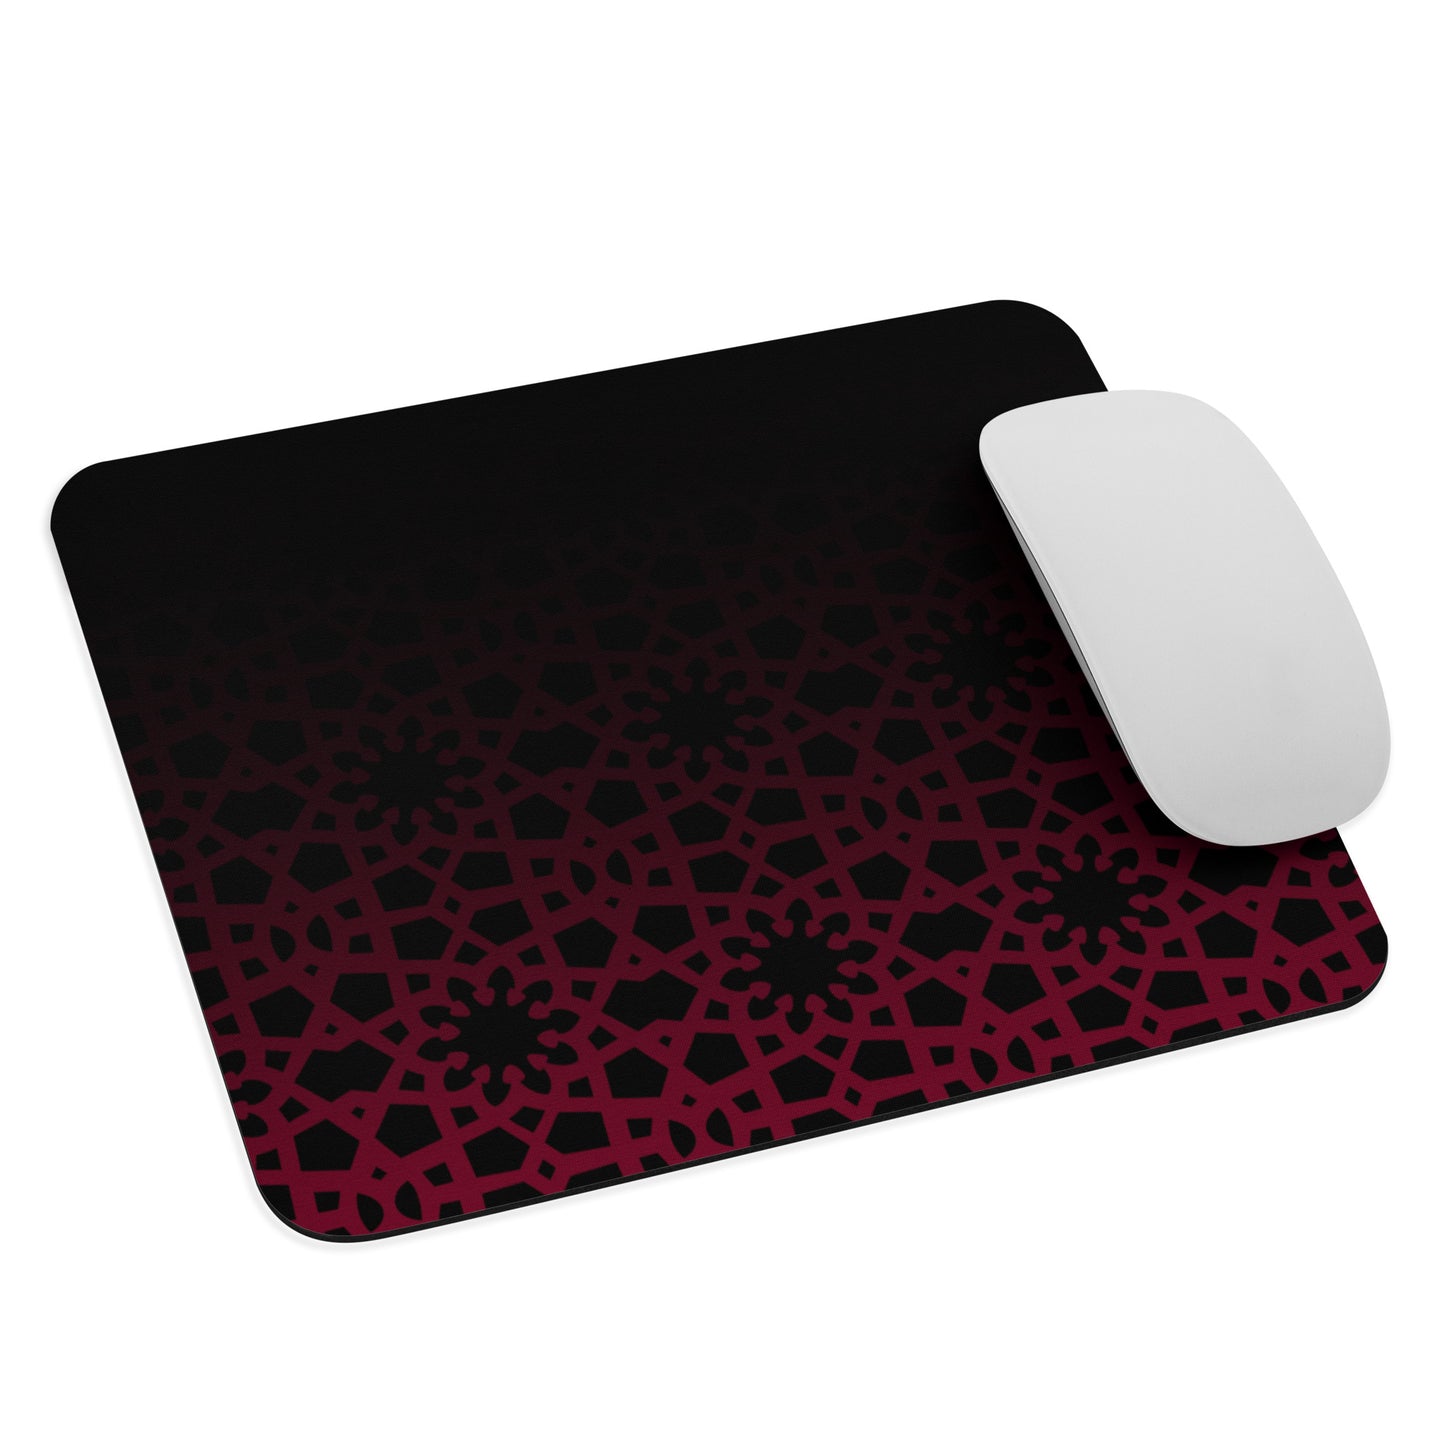 Mouse pad - Geometric Ombre in Black and Red